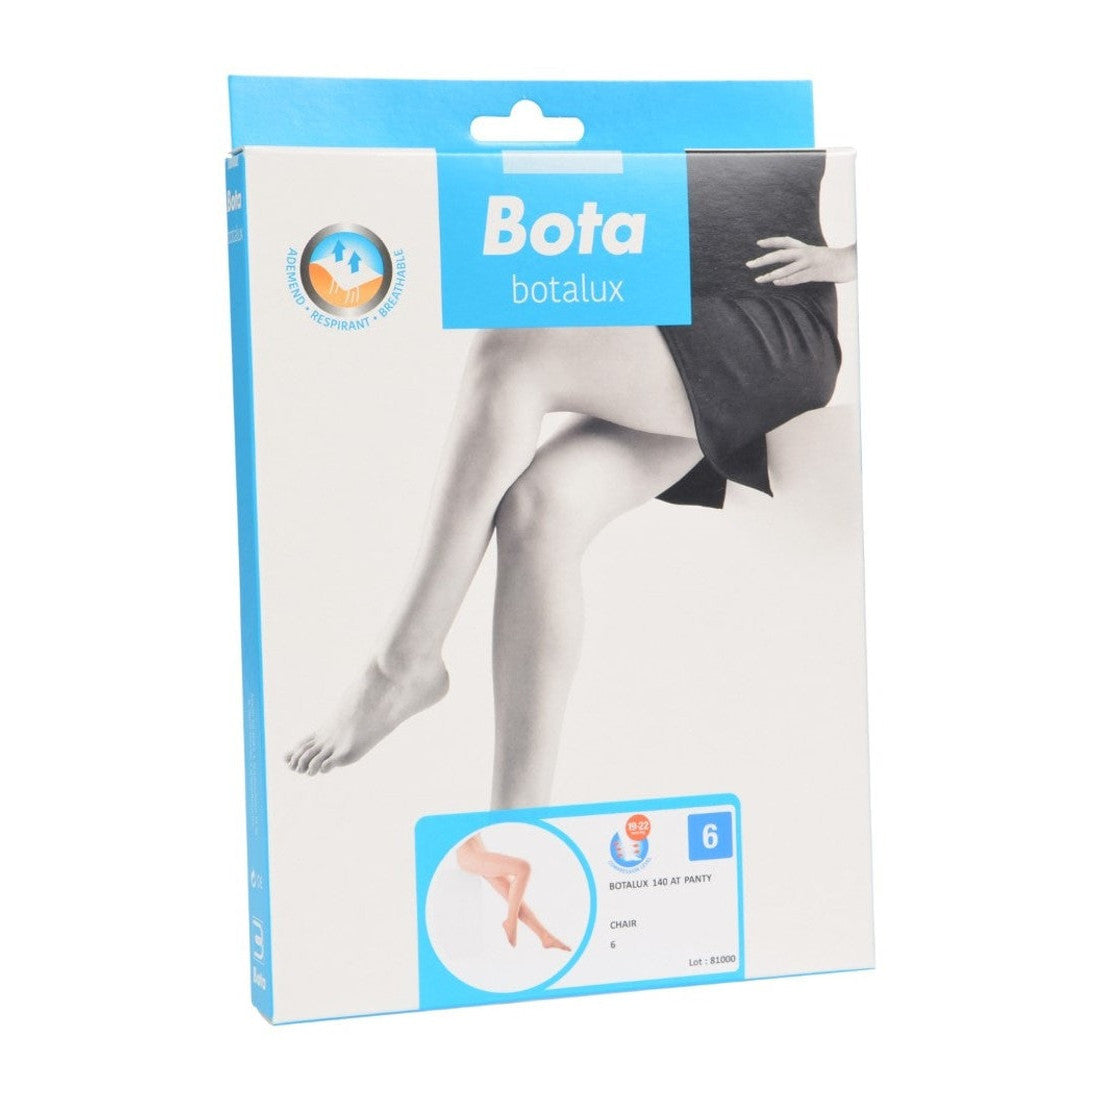 Botalux 140 support tights at ch skin color